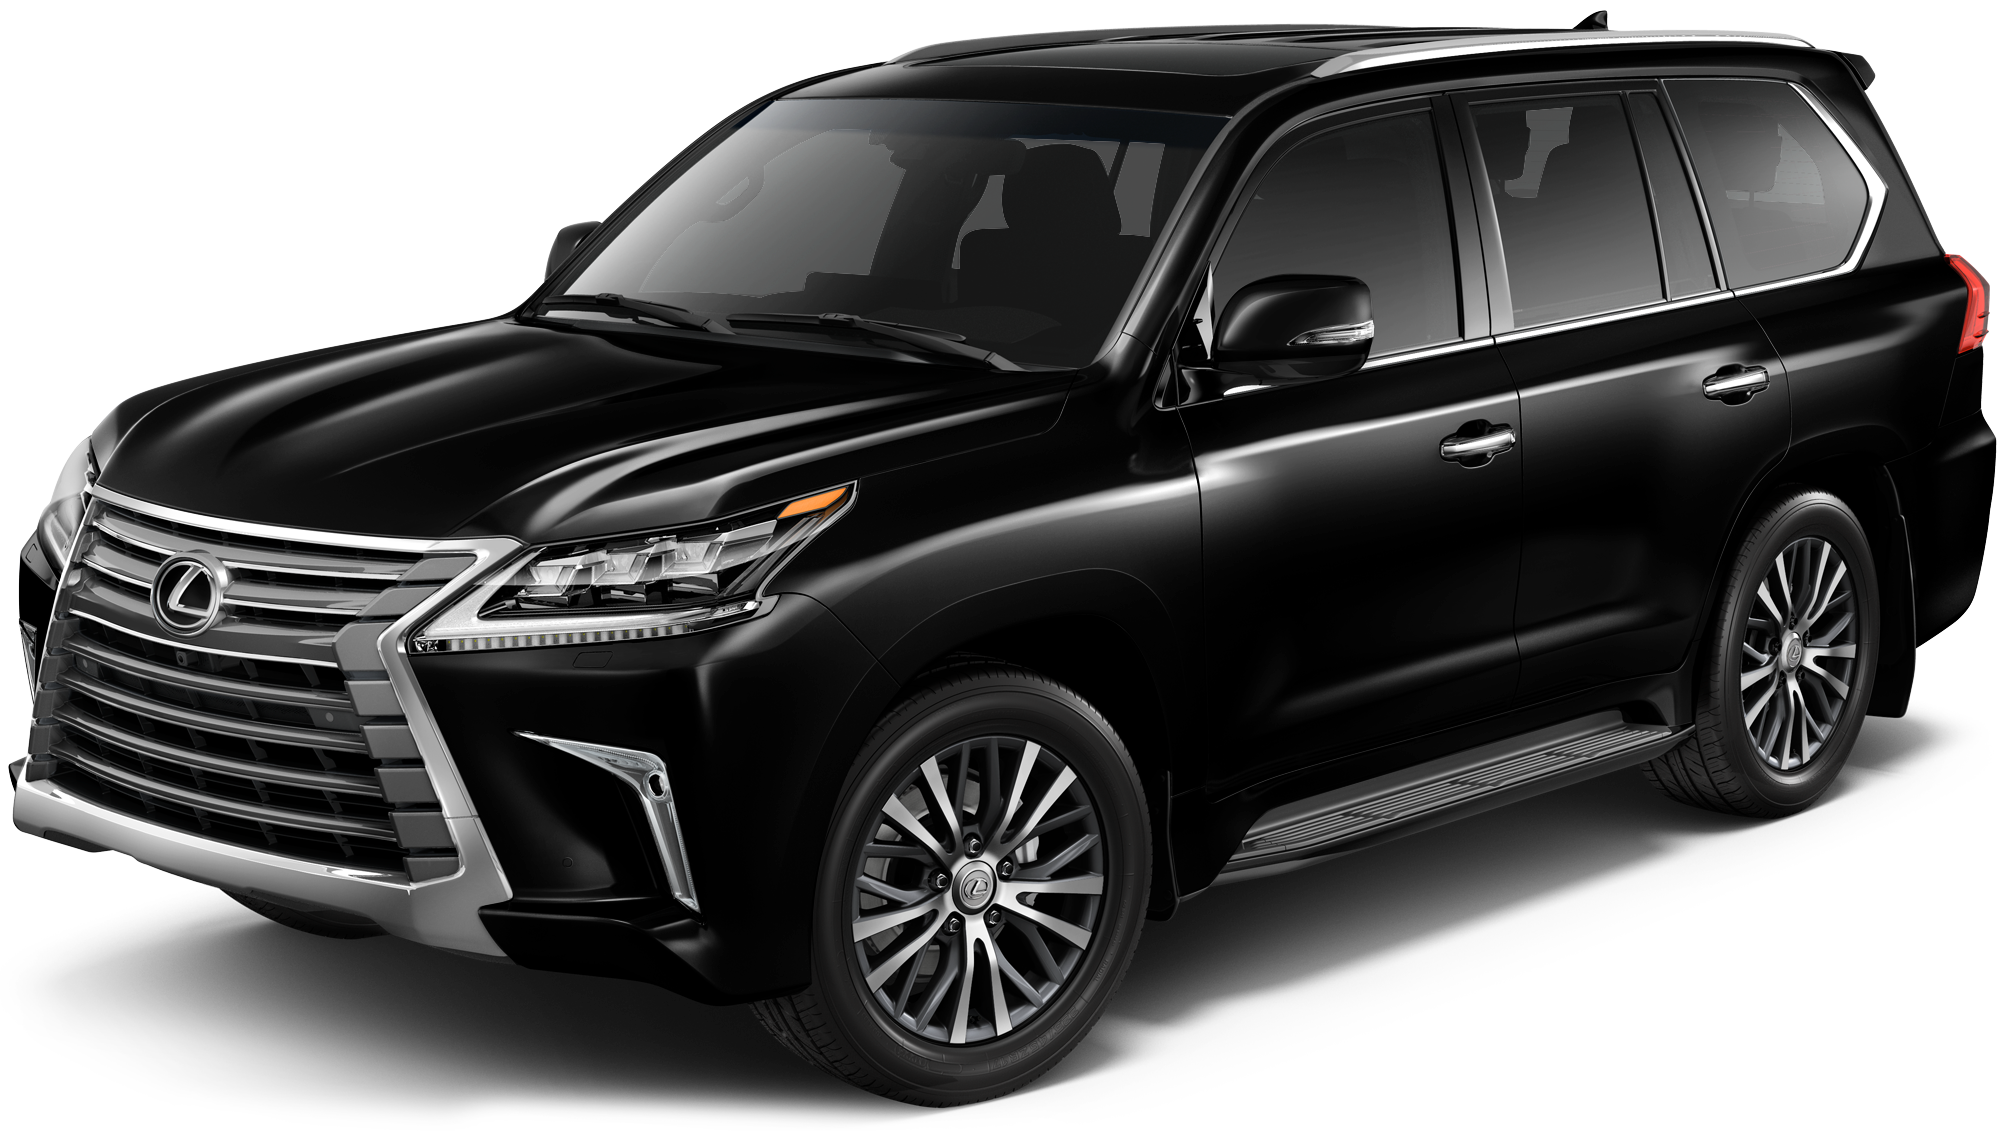 2021 Lexus LX 570 Incentives, Specials & Offers in Plano TX